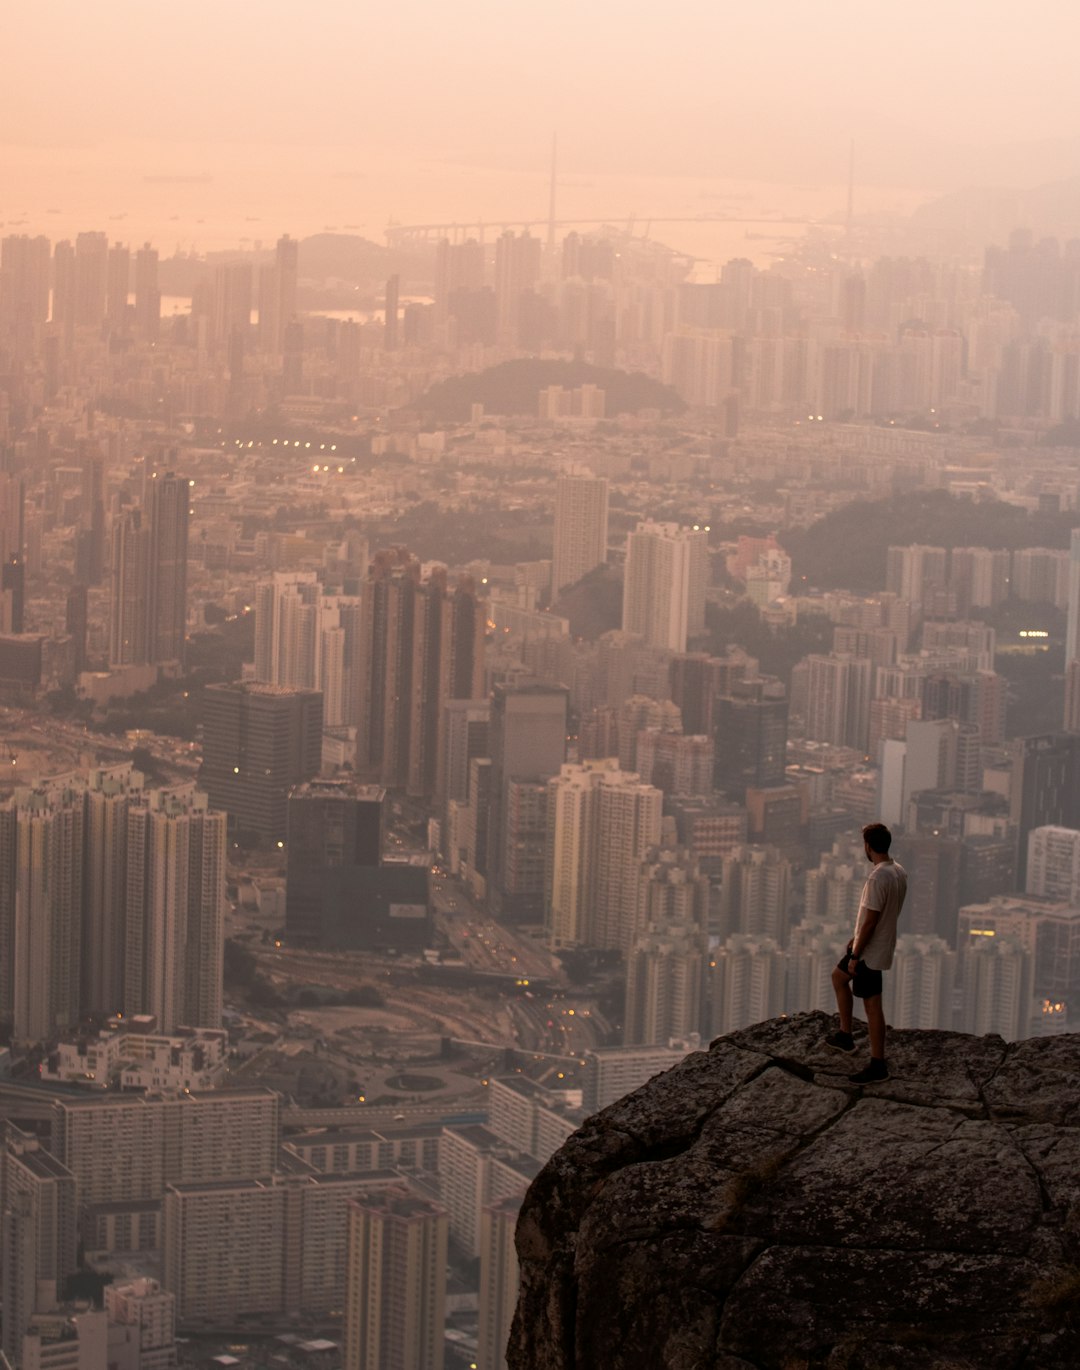 Standing on the suicide cliff in HK